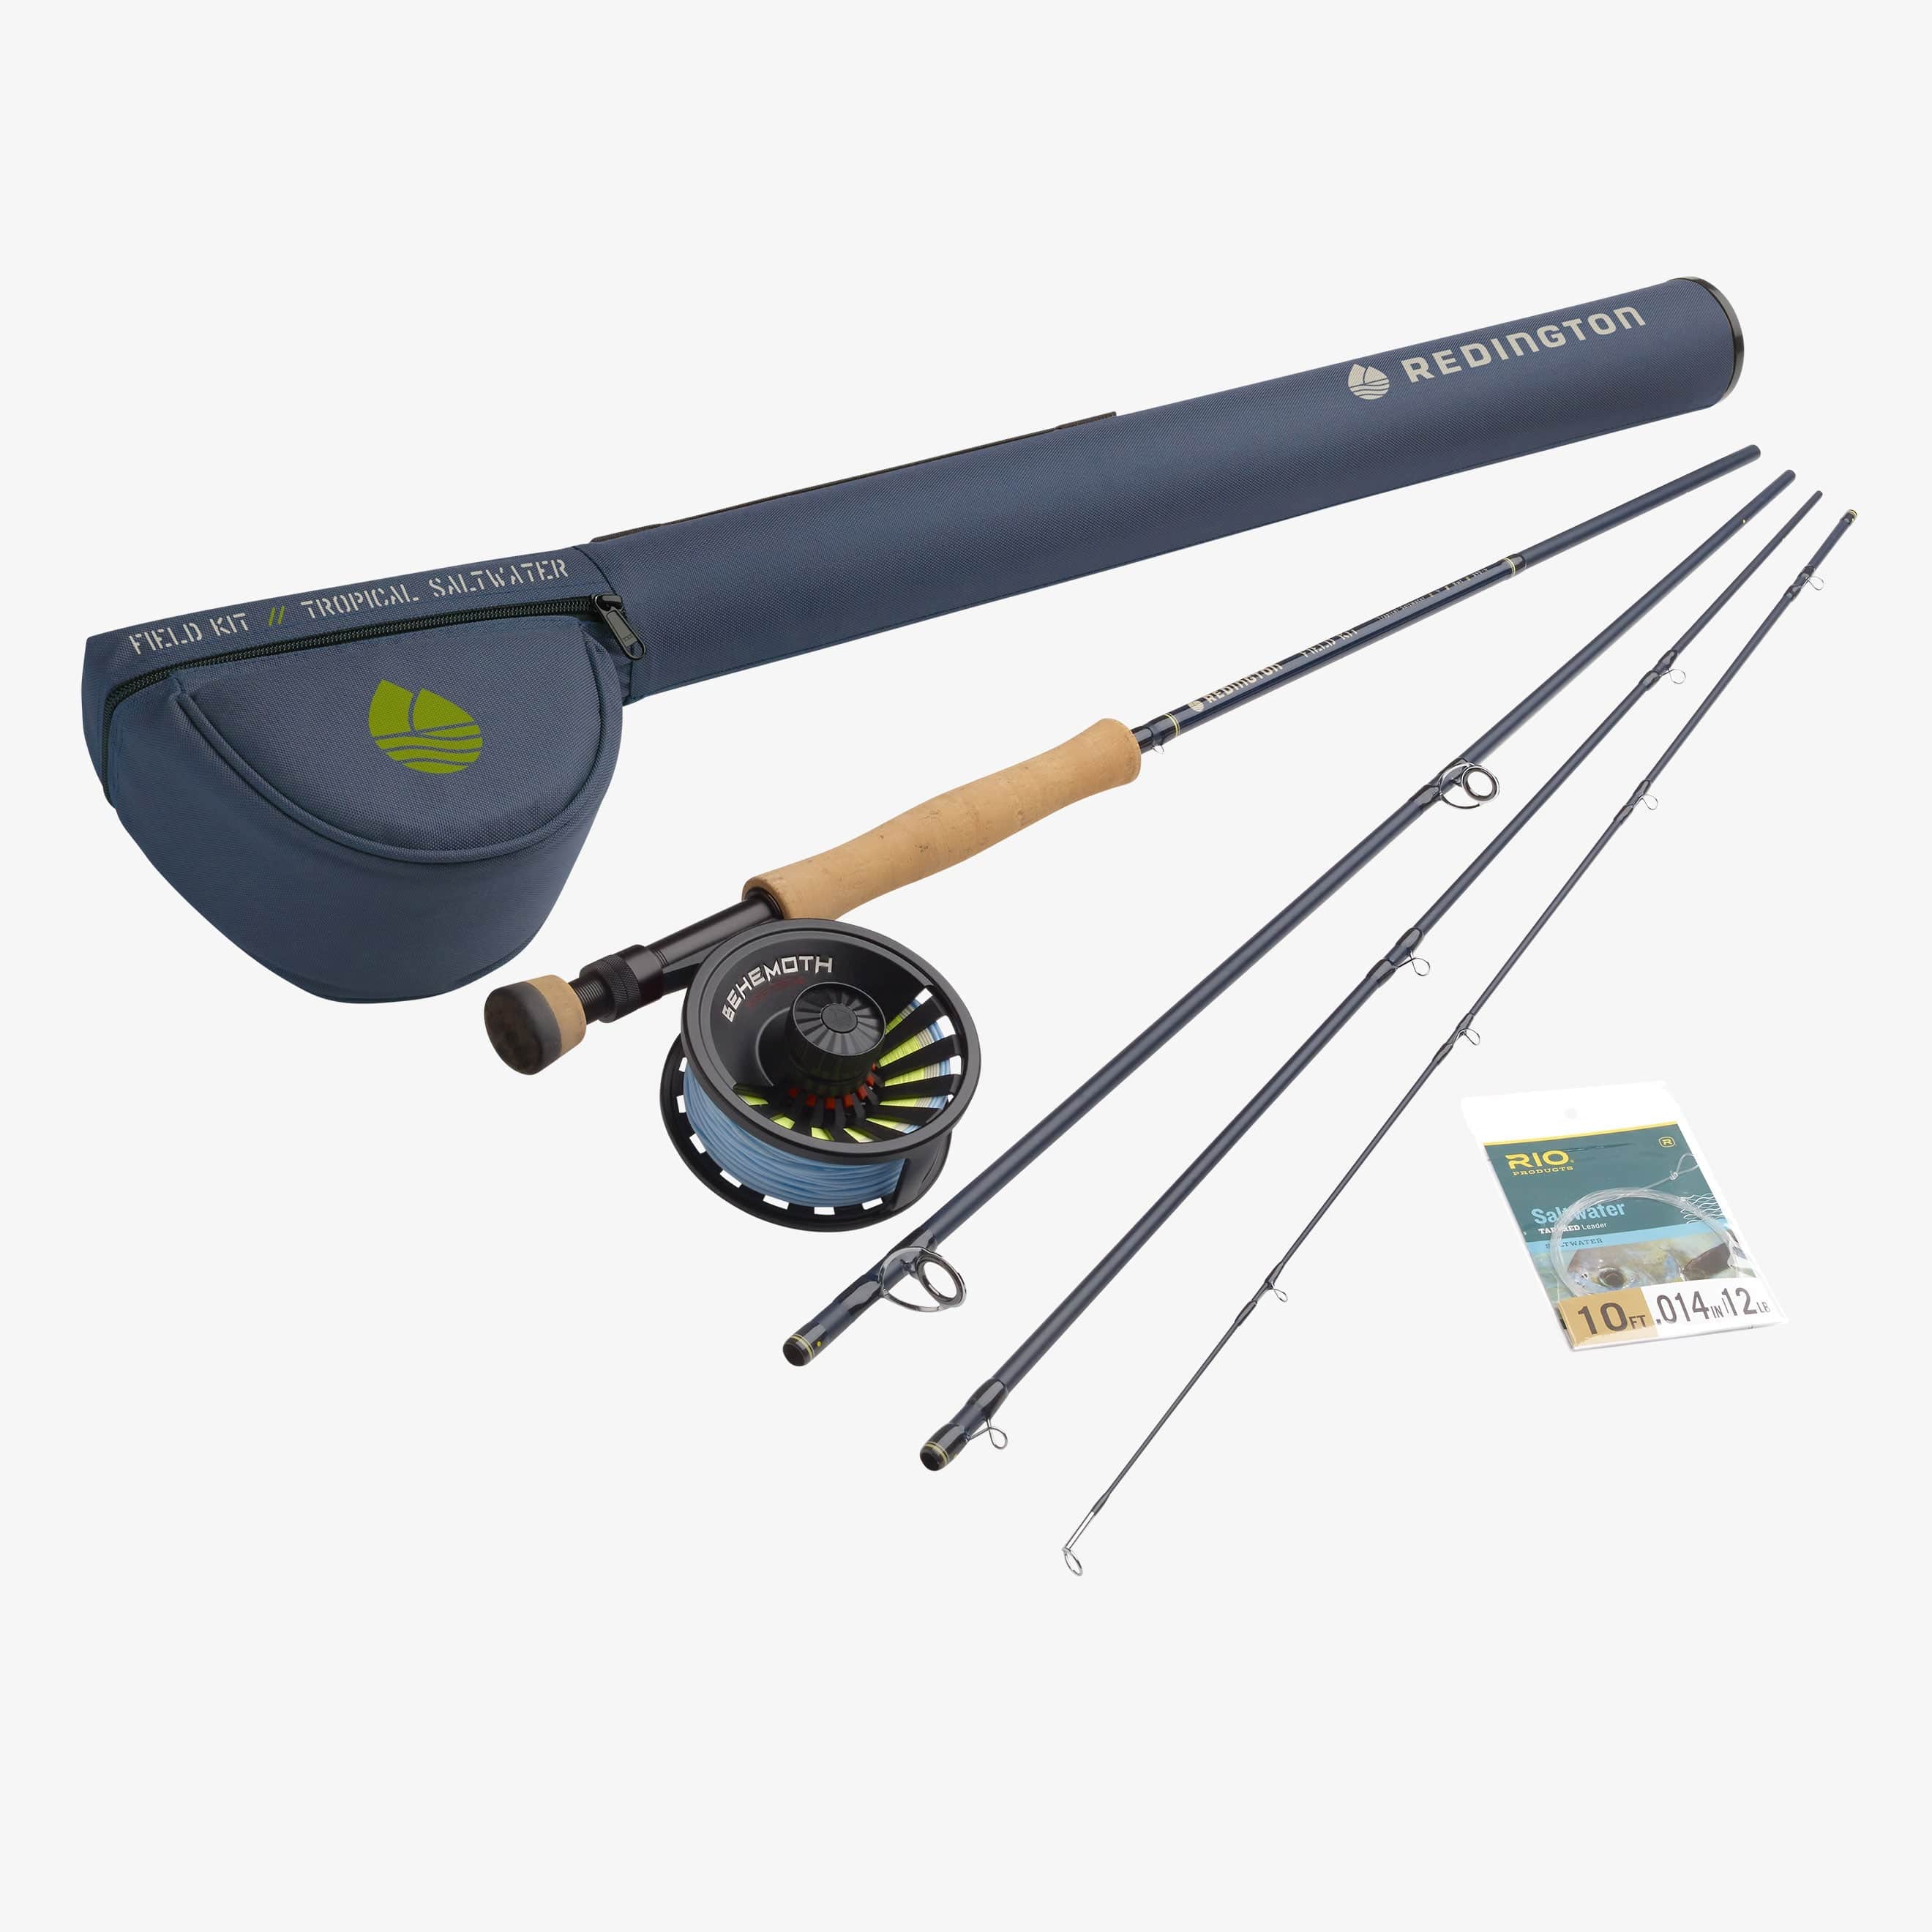 Redington Field Kit - Tropical Saltwater Fly Combo 8wt - The Saltwater Edge